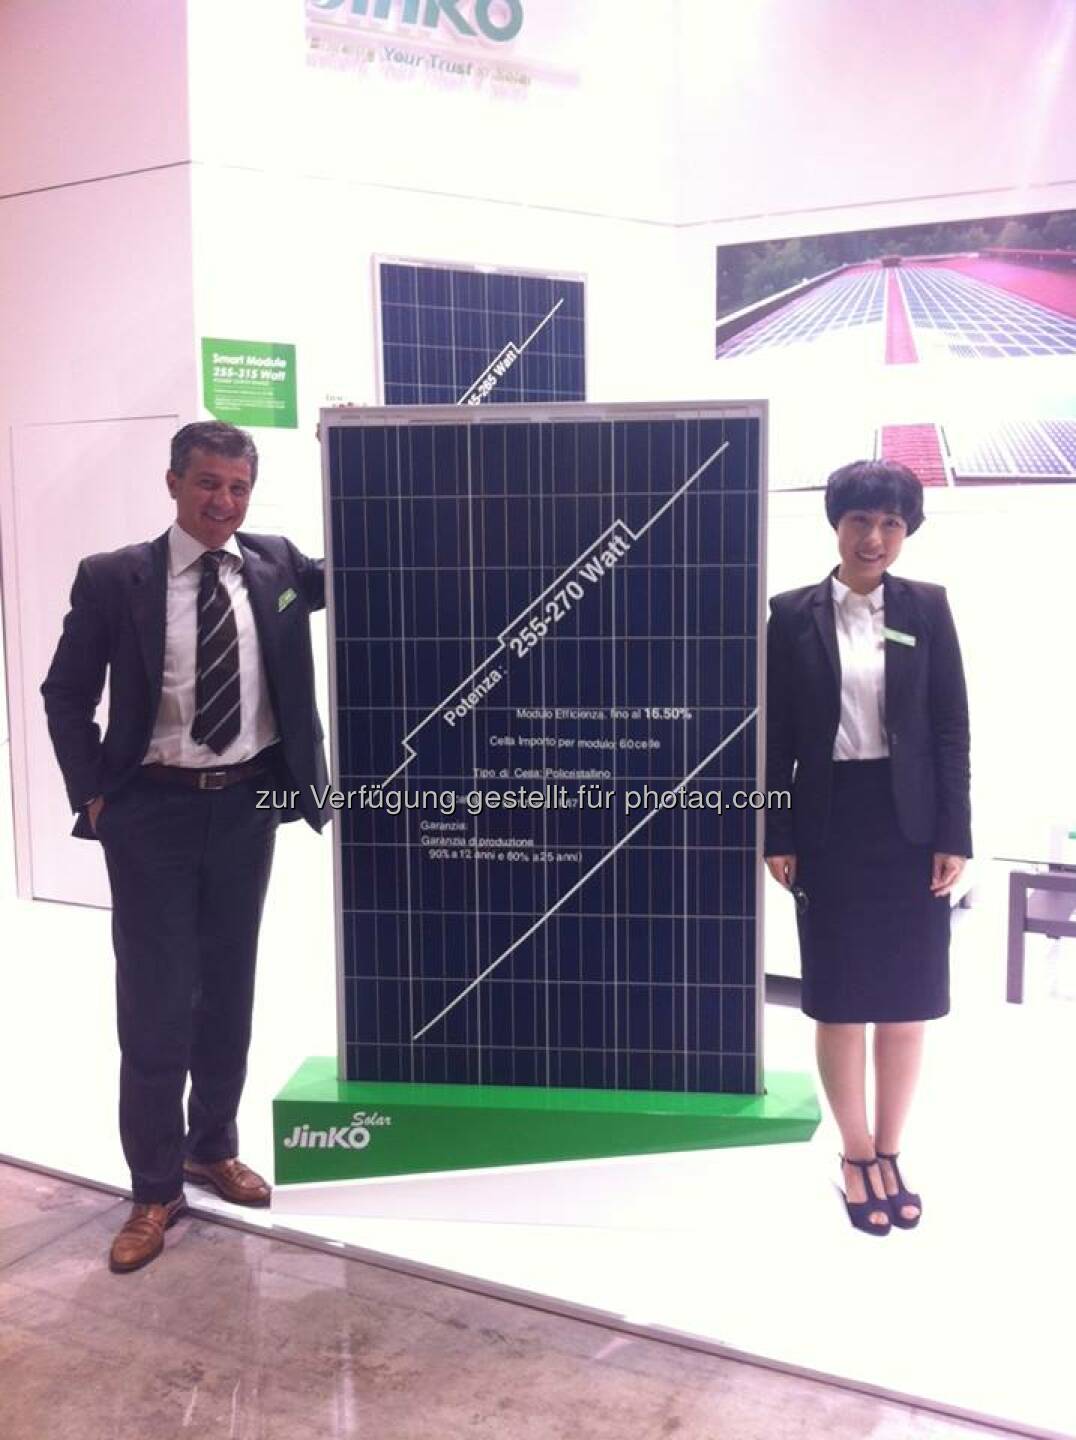 Jinko: We are looking forward to meeting you at booth E10 at Solar Expo in Milan.  Source: http://facebook.com/439664686151652